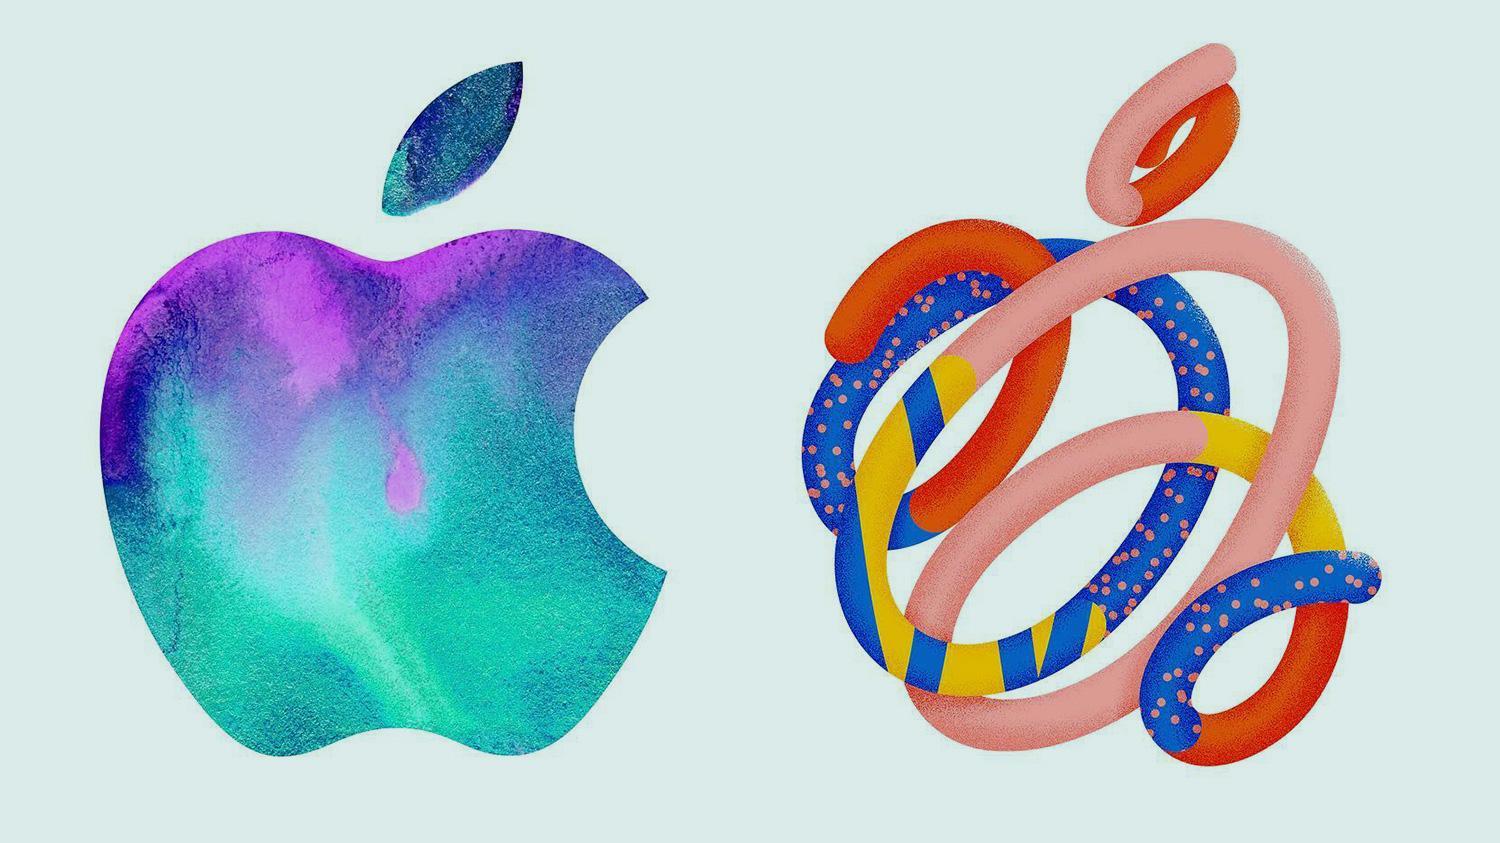 Appel Logo - These artists reimagined the Apple logo for the new iPad Pro launch ...